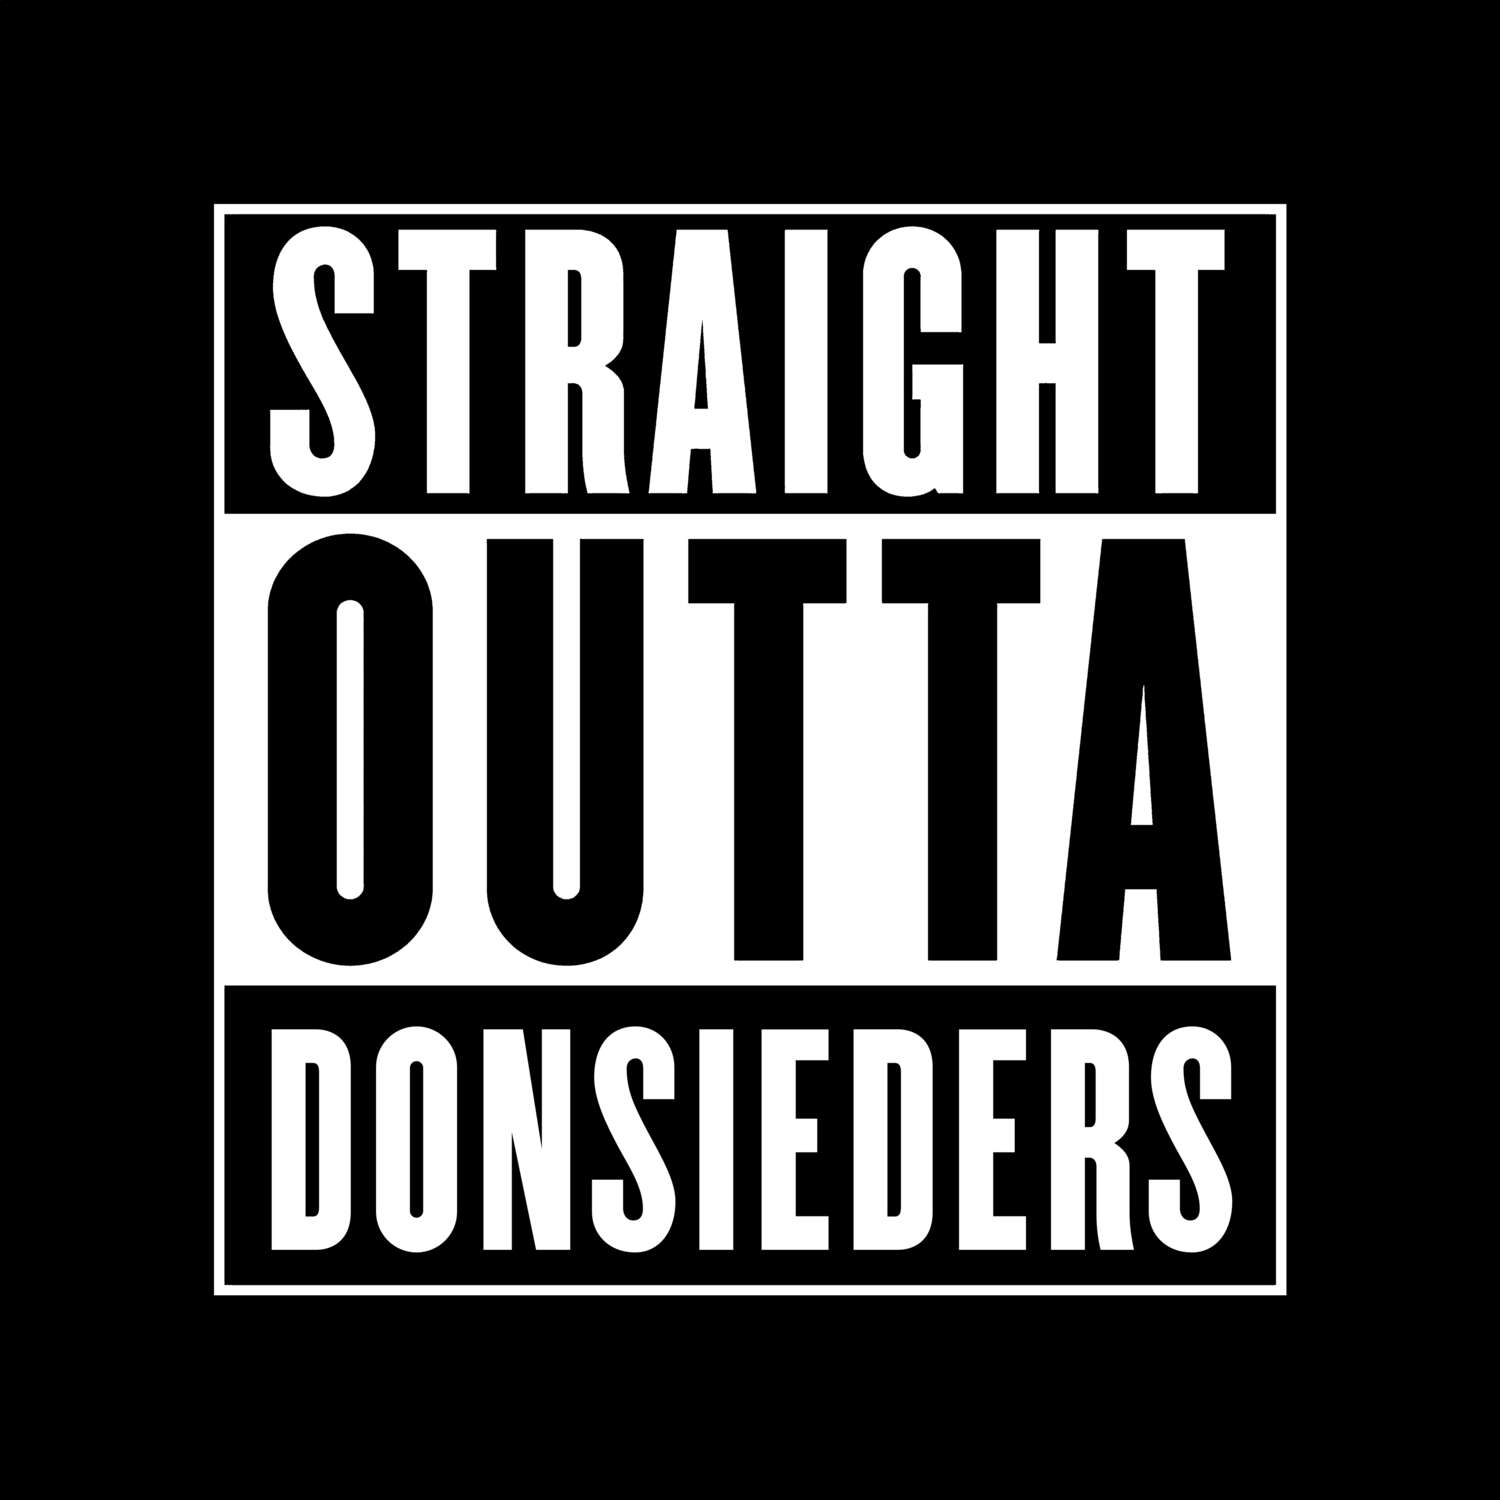 Donsieders T-Shirt »Straight Outta«